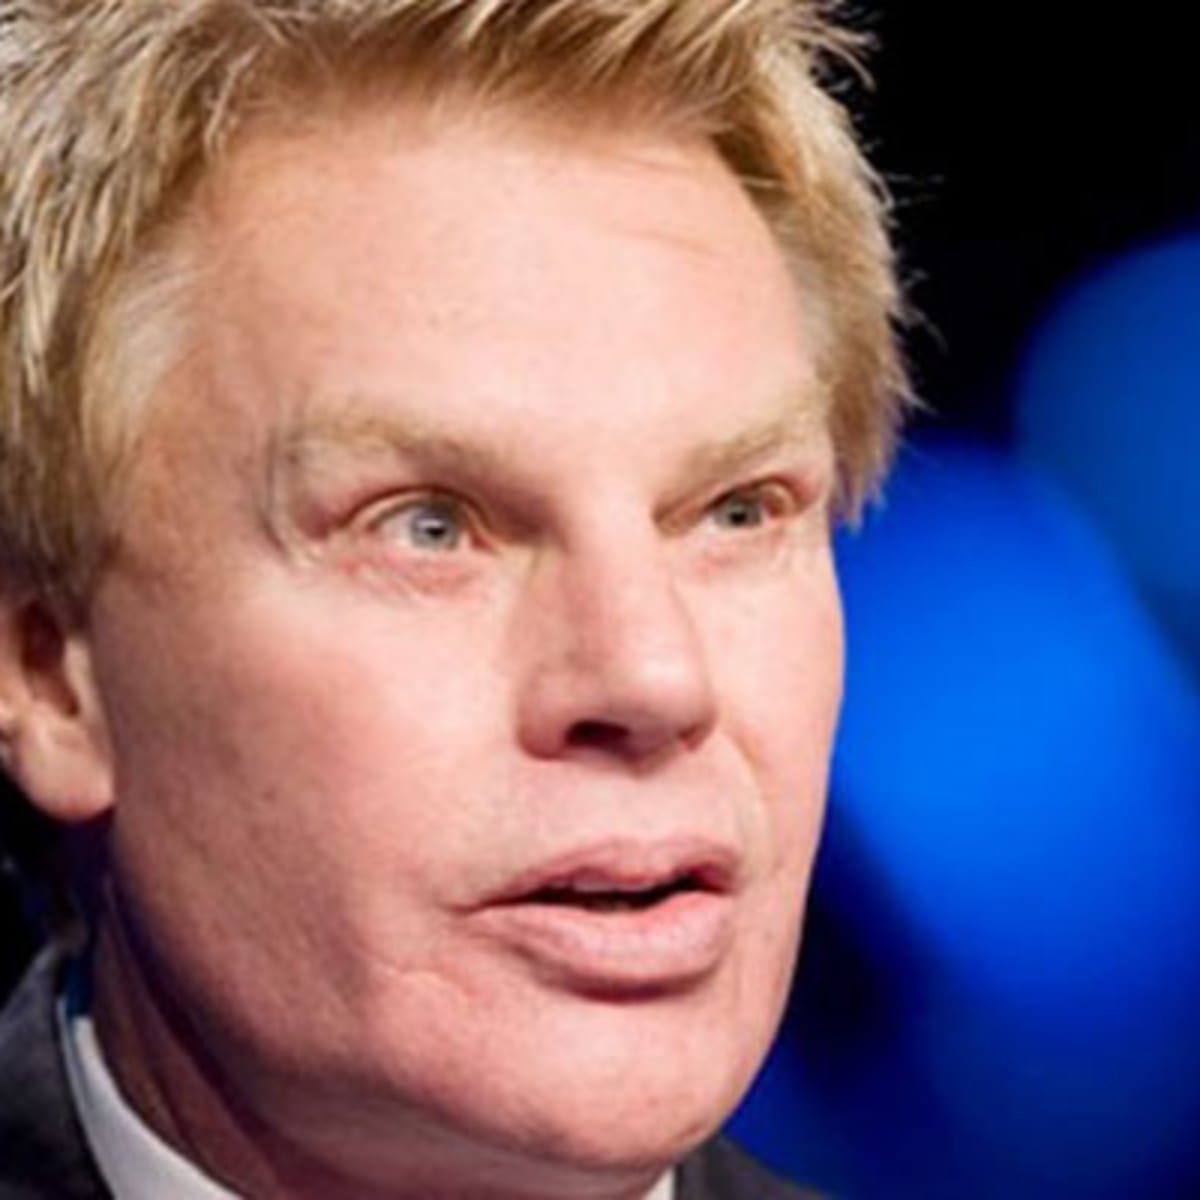 abercrombie & fitch ceo